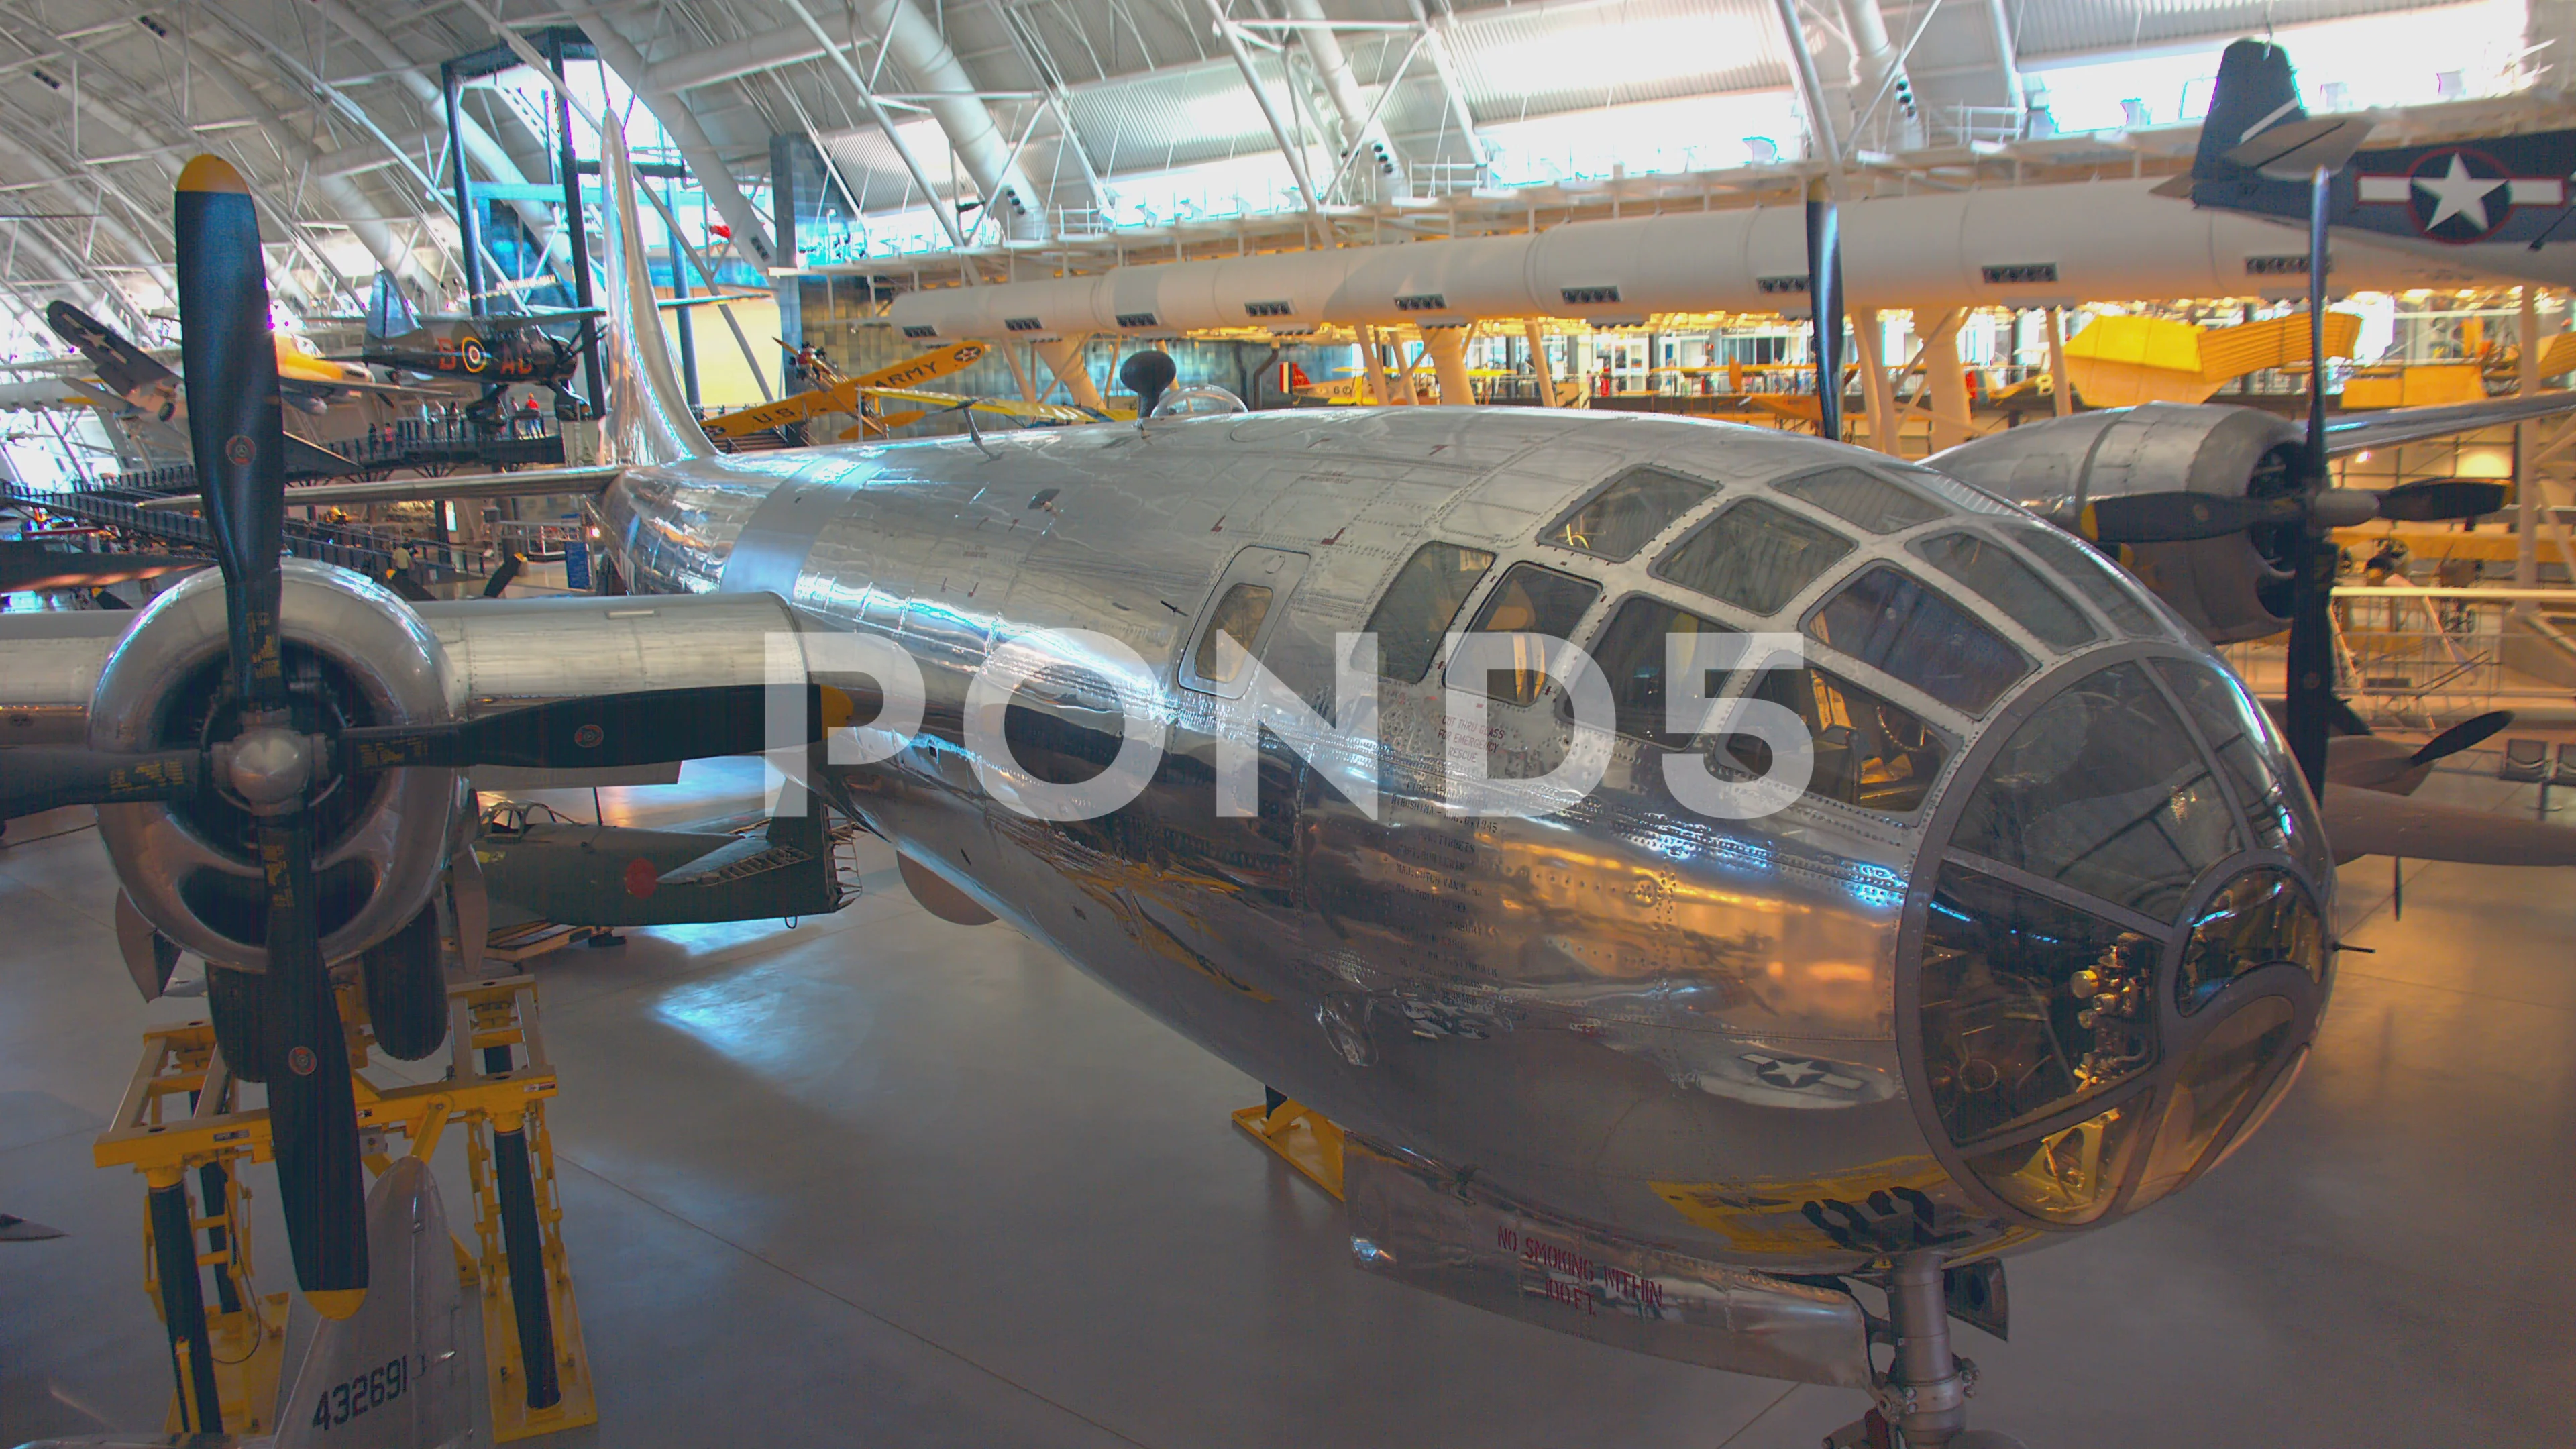 does the smithsonian have the enola gay